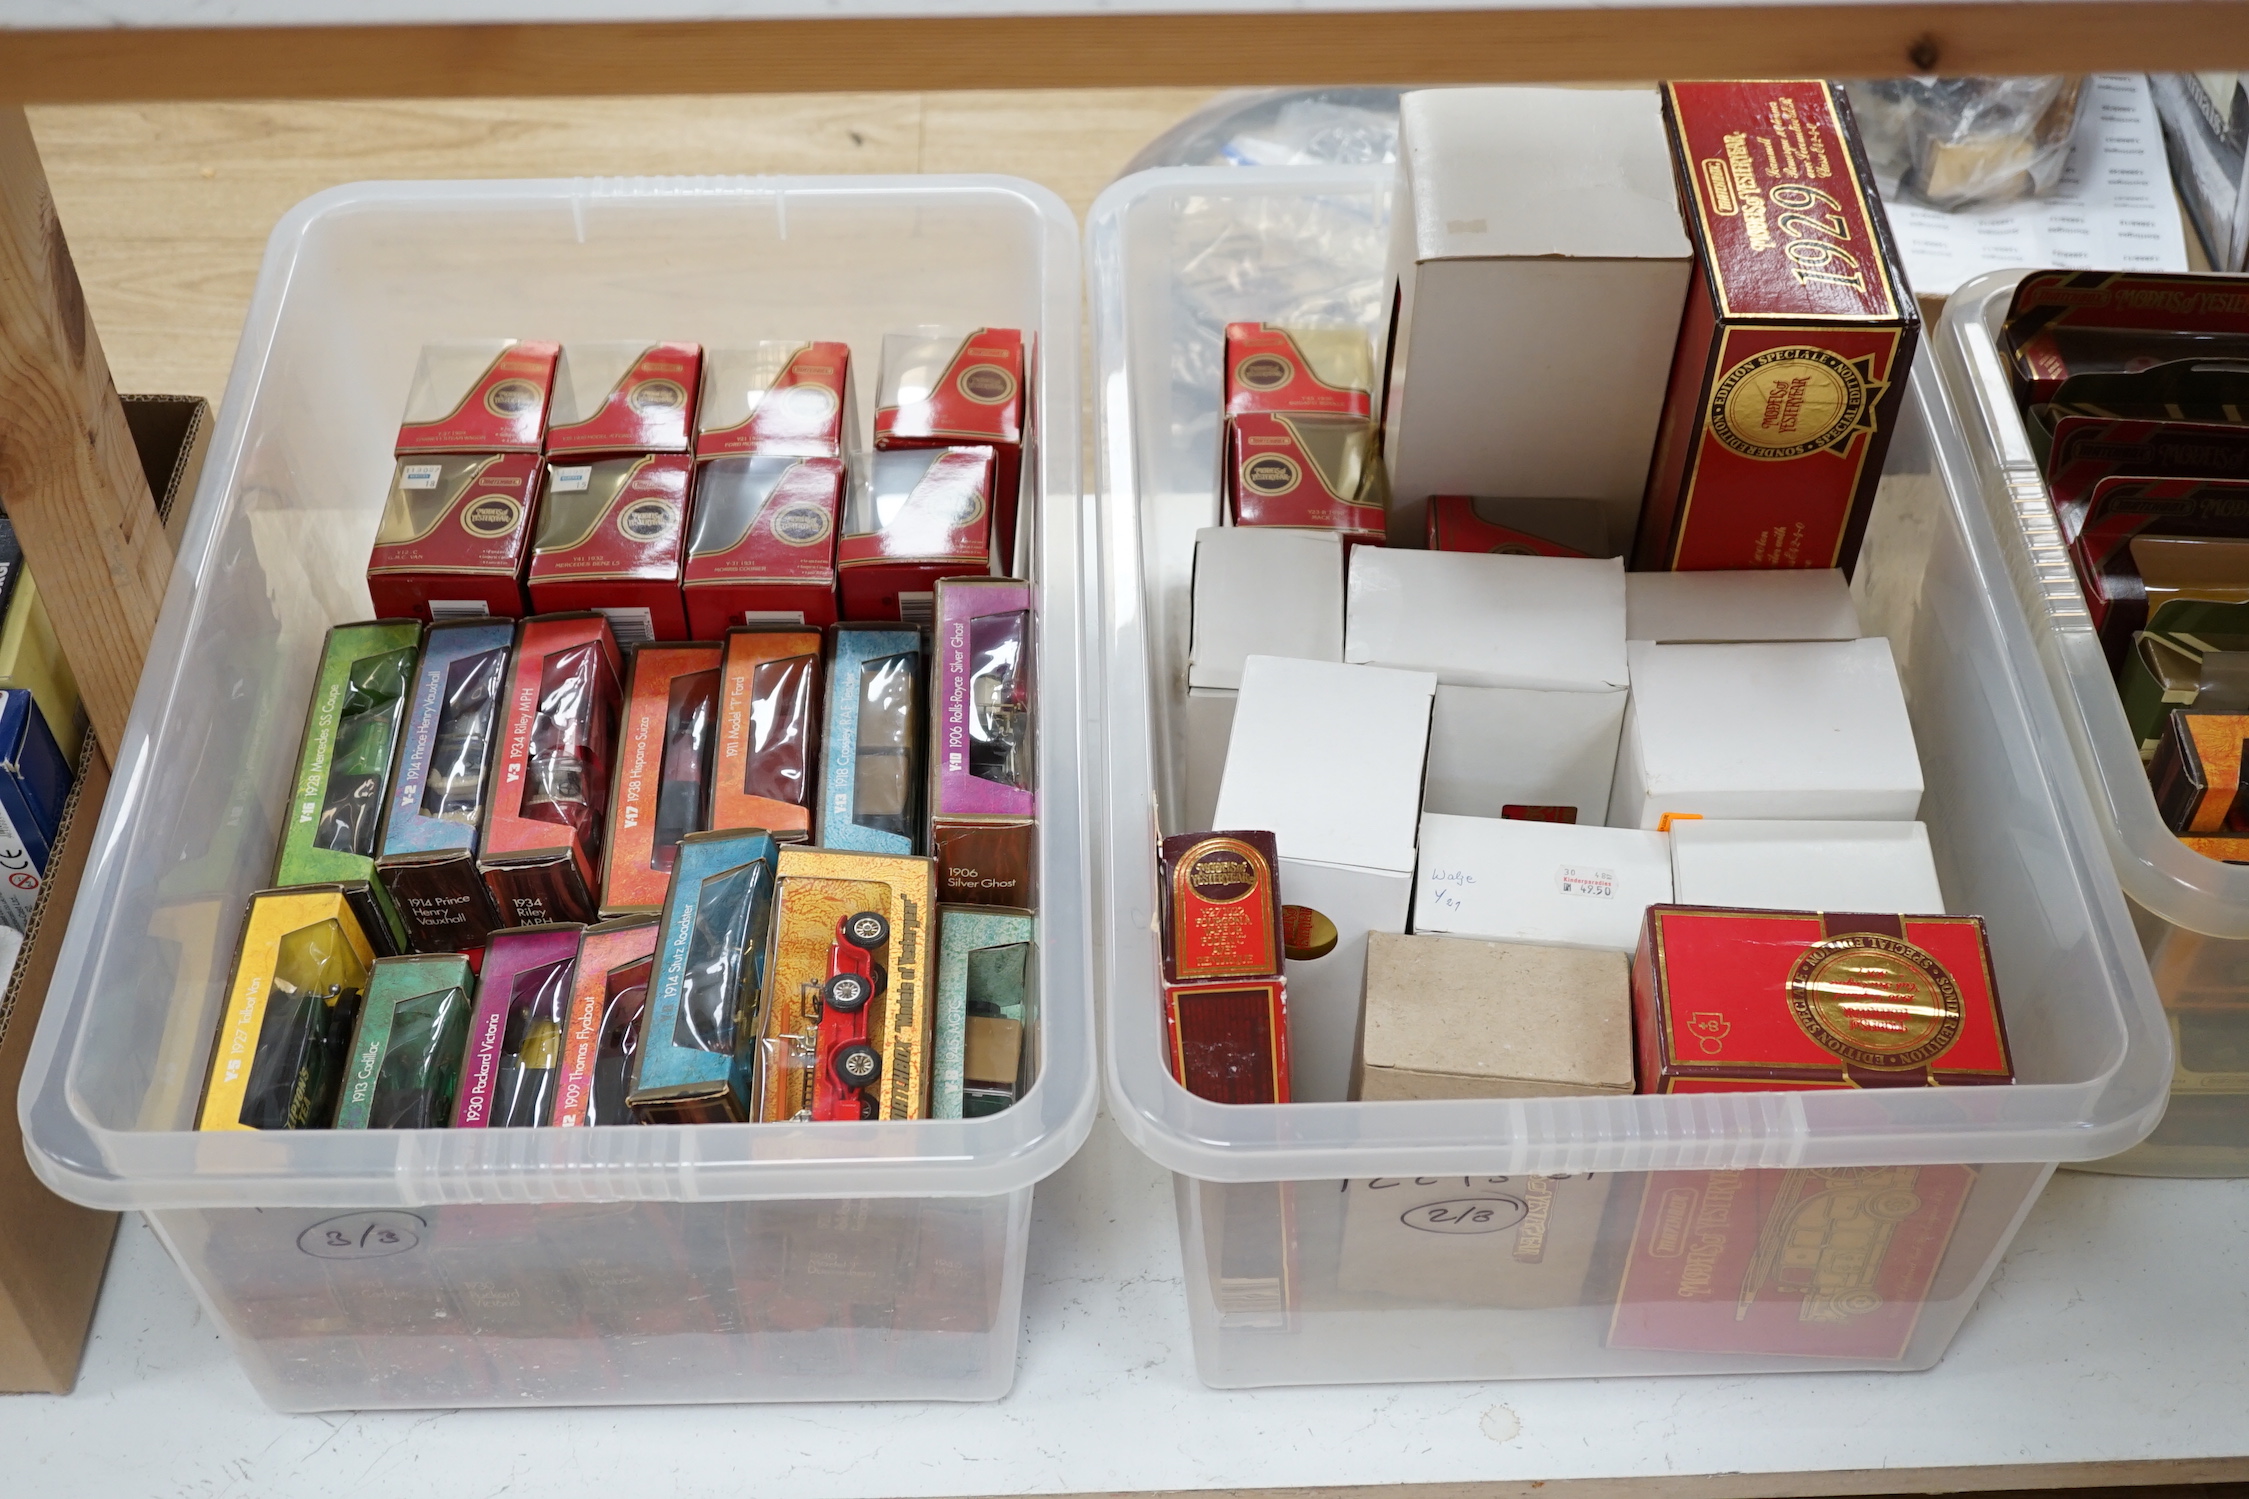 Ninety-five boxed Matchbox Models of Yesteryear, in a variety of different Matchbox era boxes